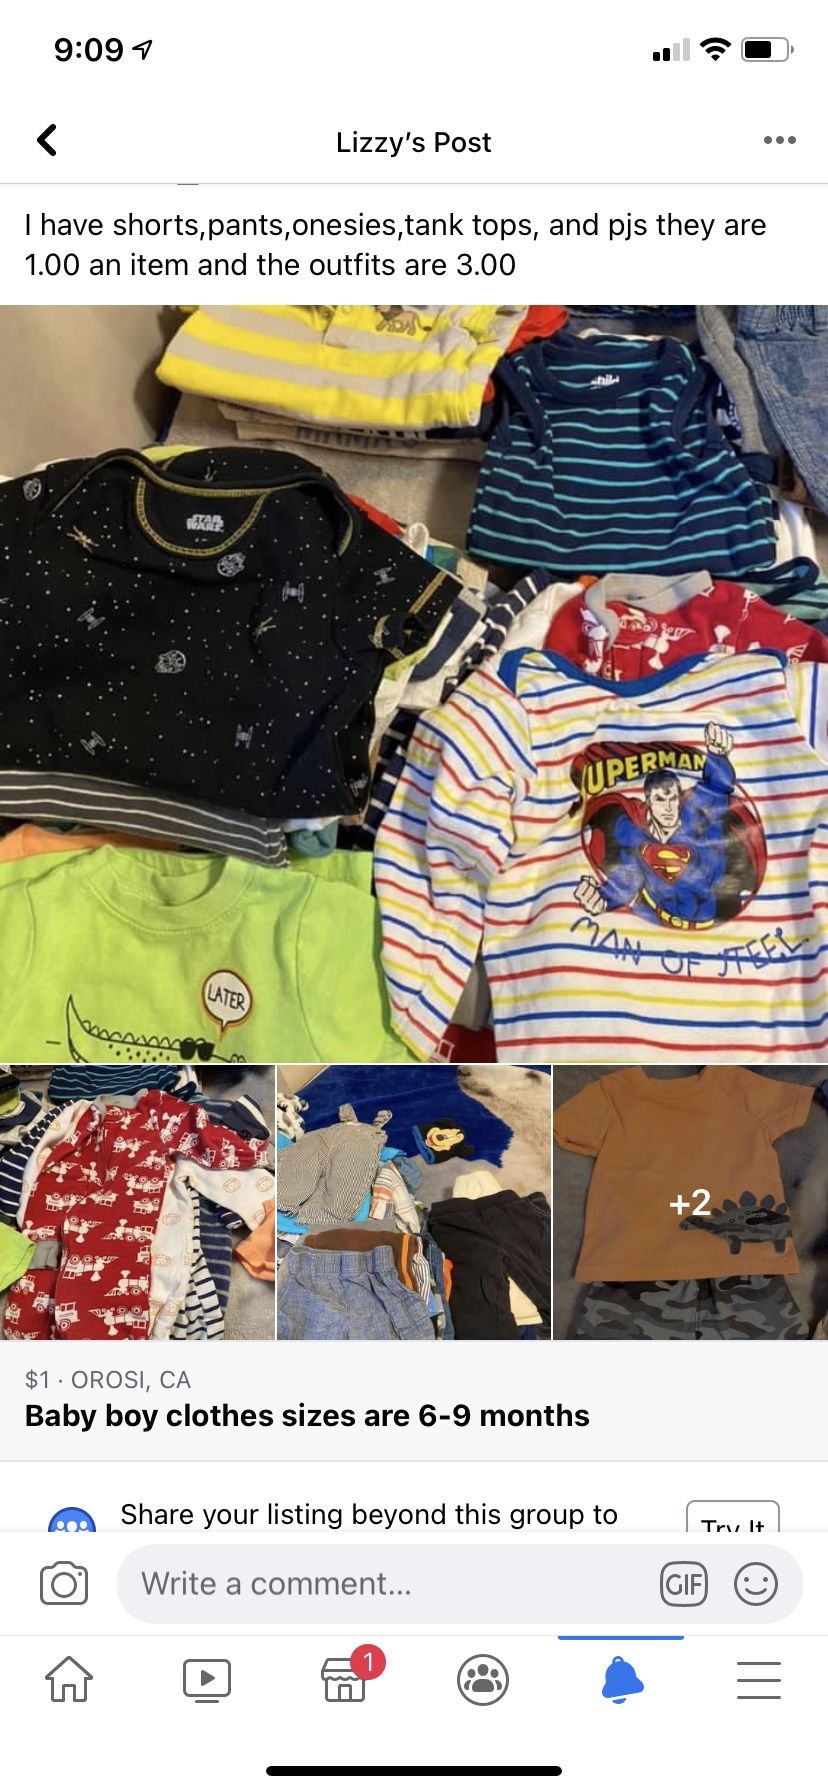 Sizes are 6-9 months baby boy clothes